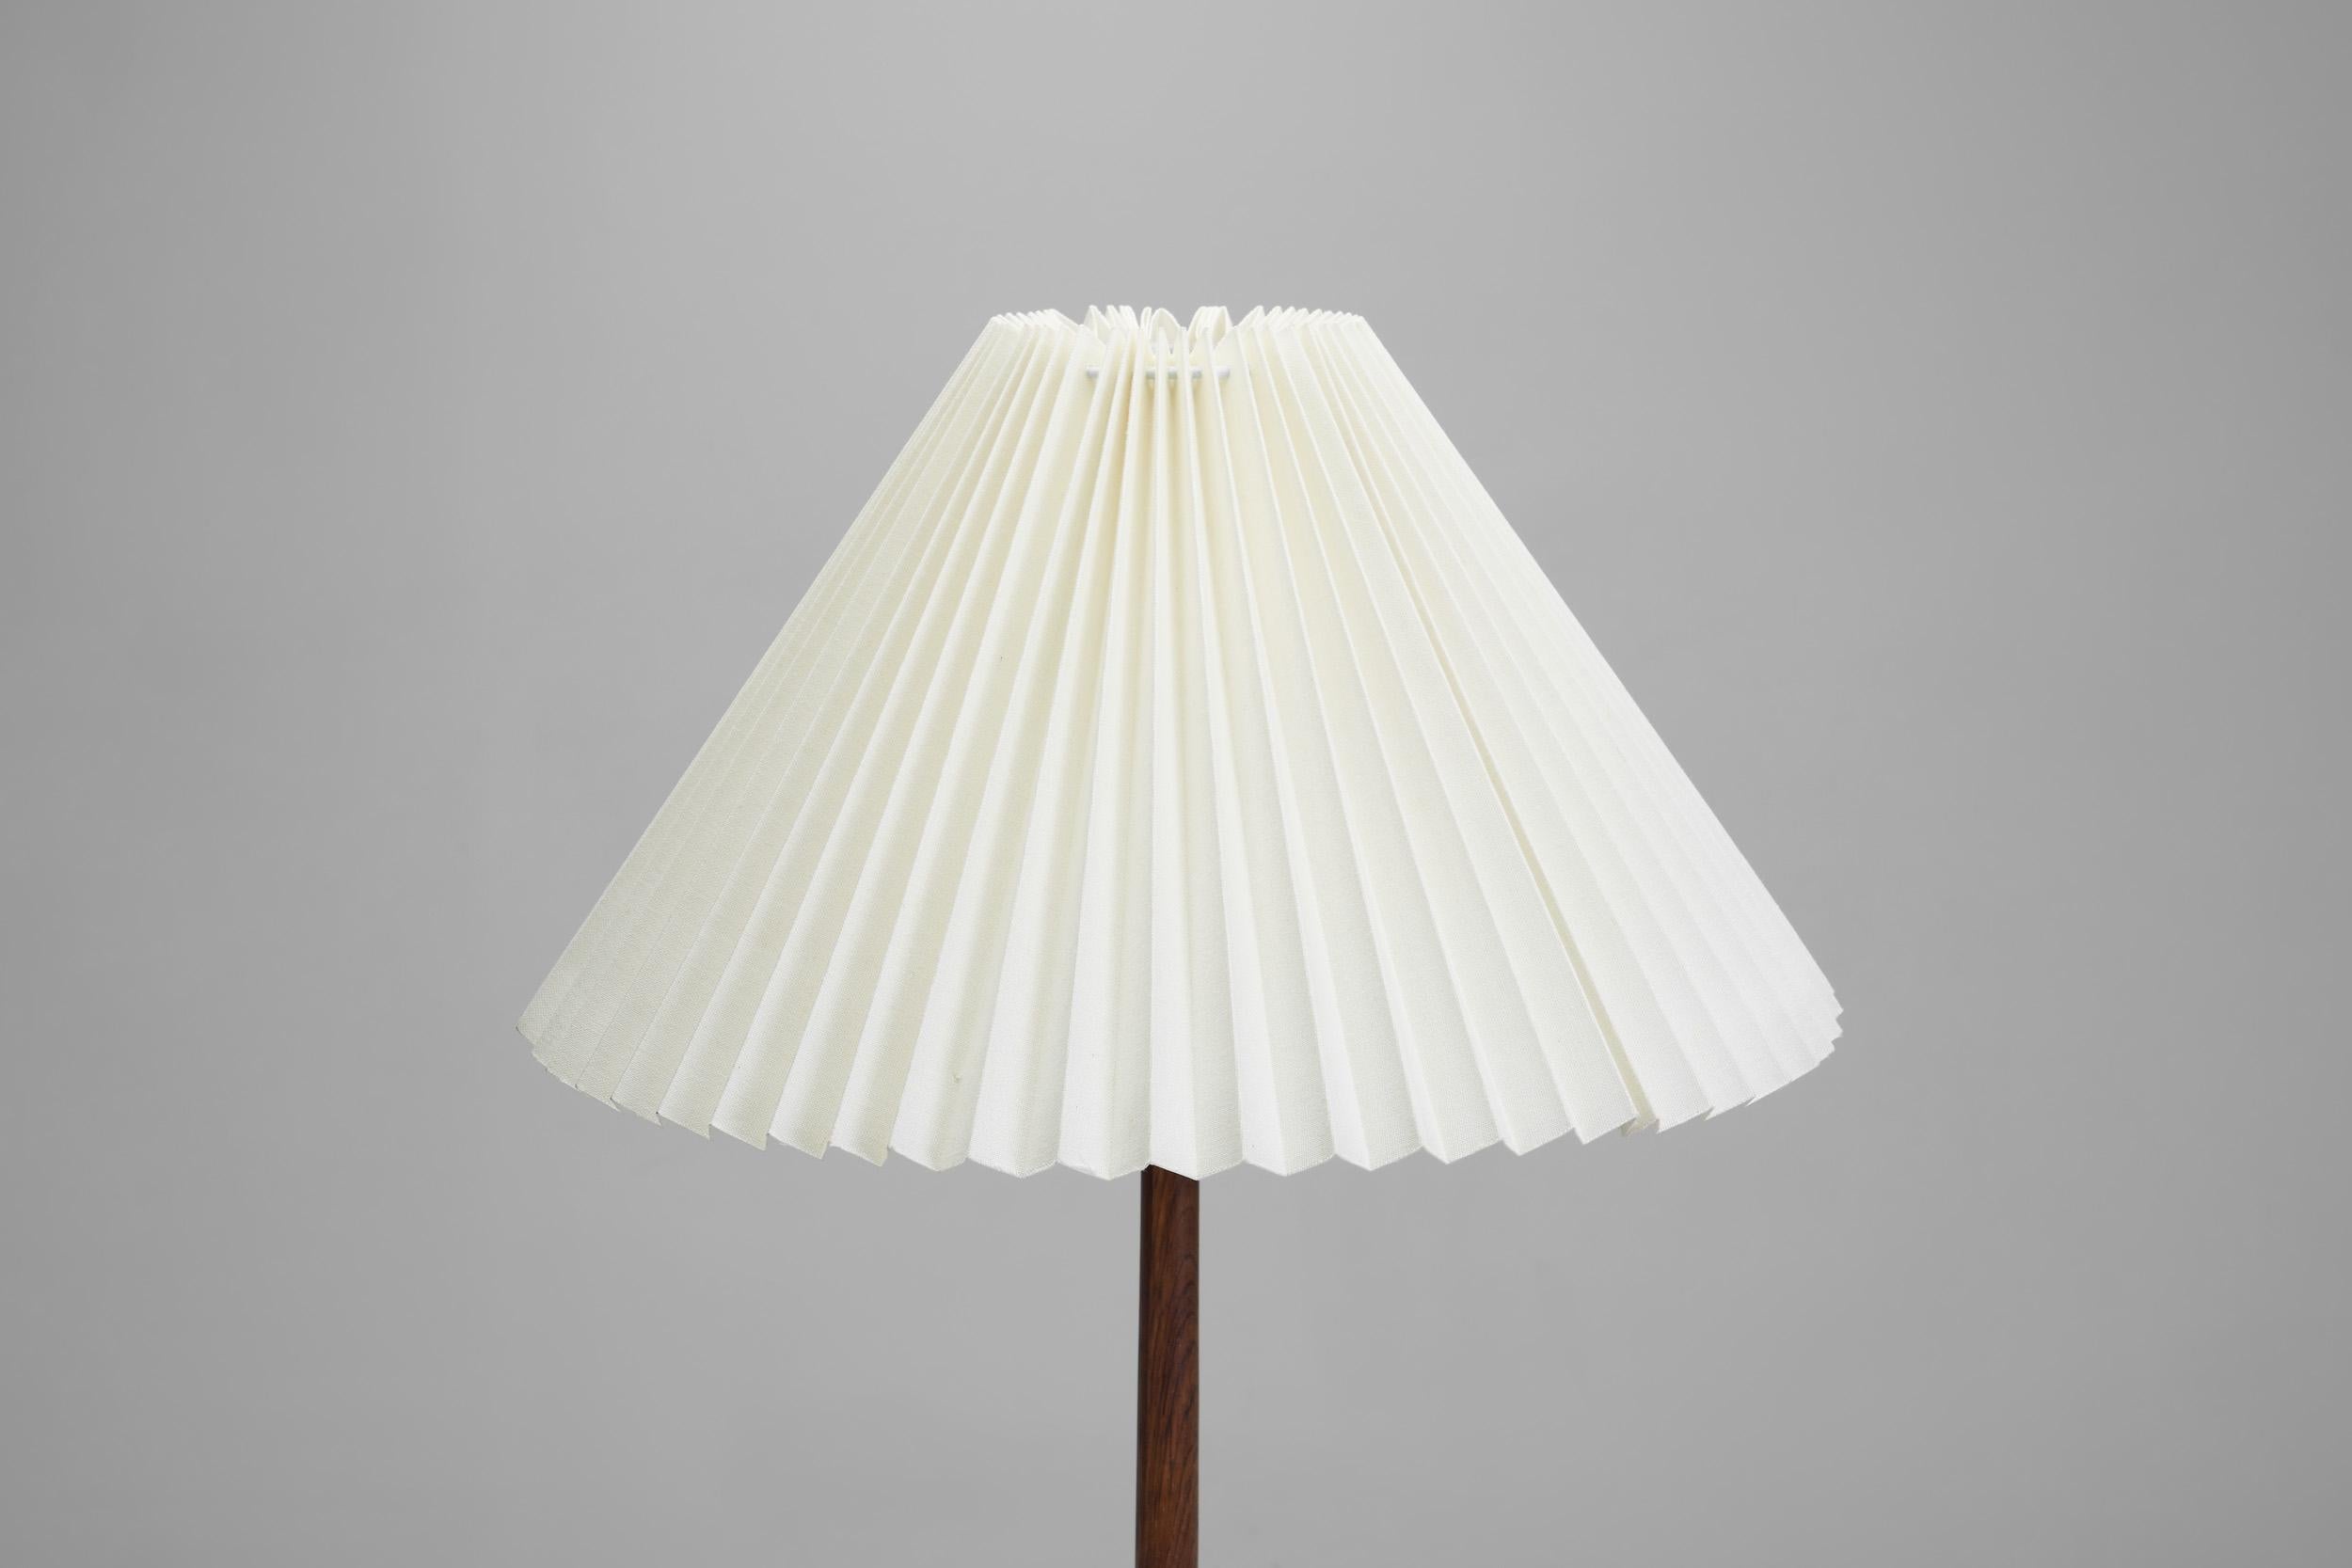 Floor Lamp with Ruched Shade, Scandinavia ca 1950s For Sale 2